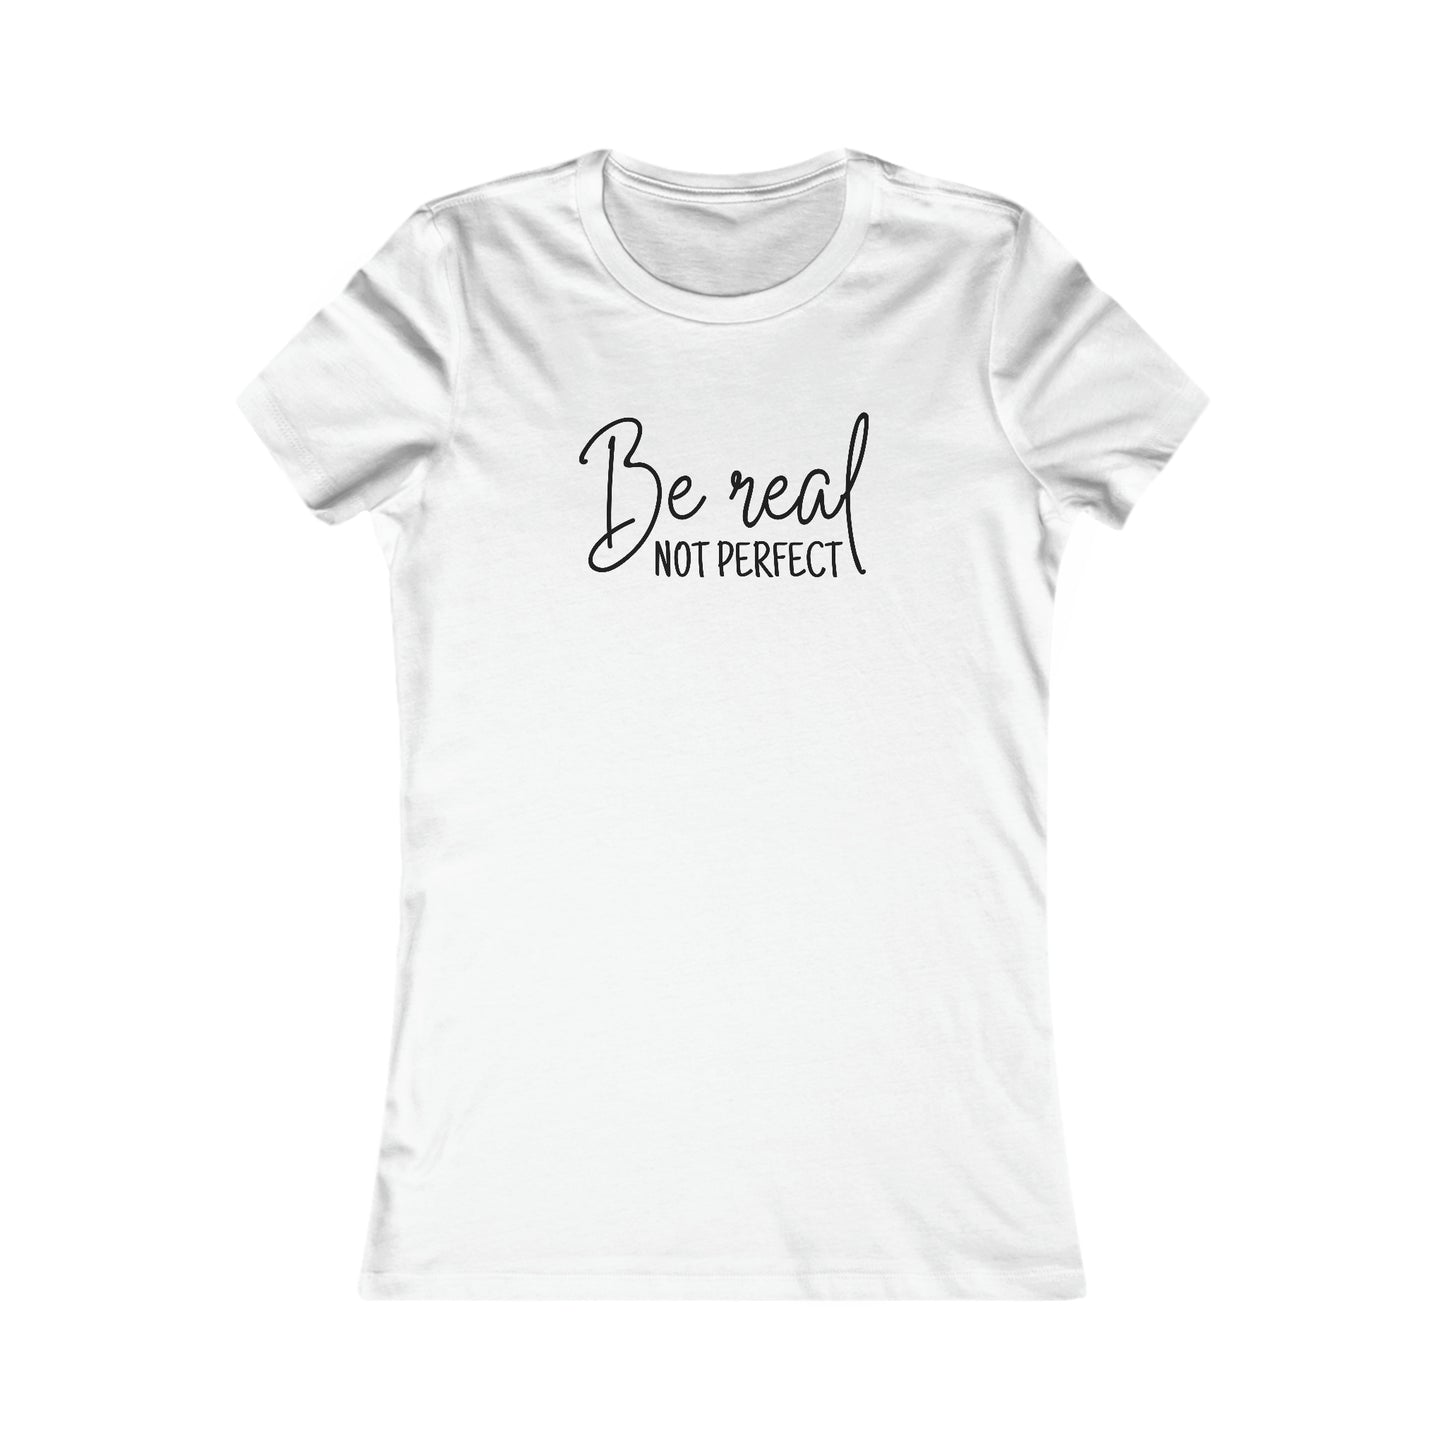 Be Real Not Perfect - Women's Favorite Tee